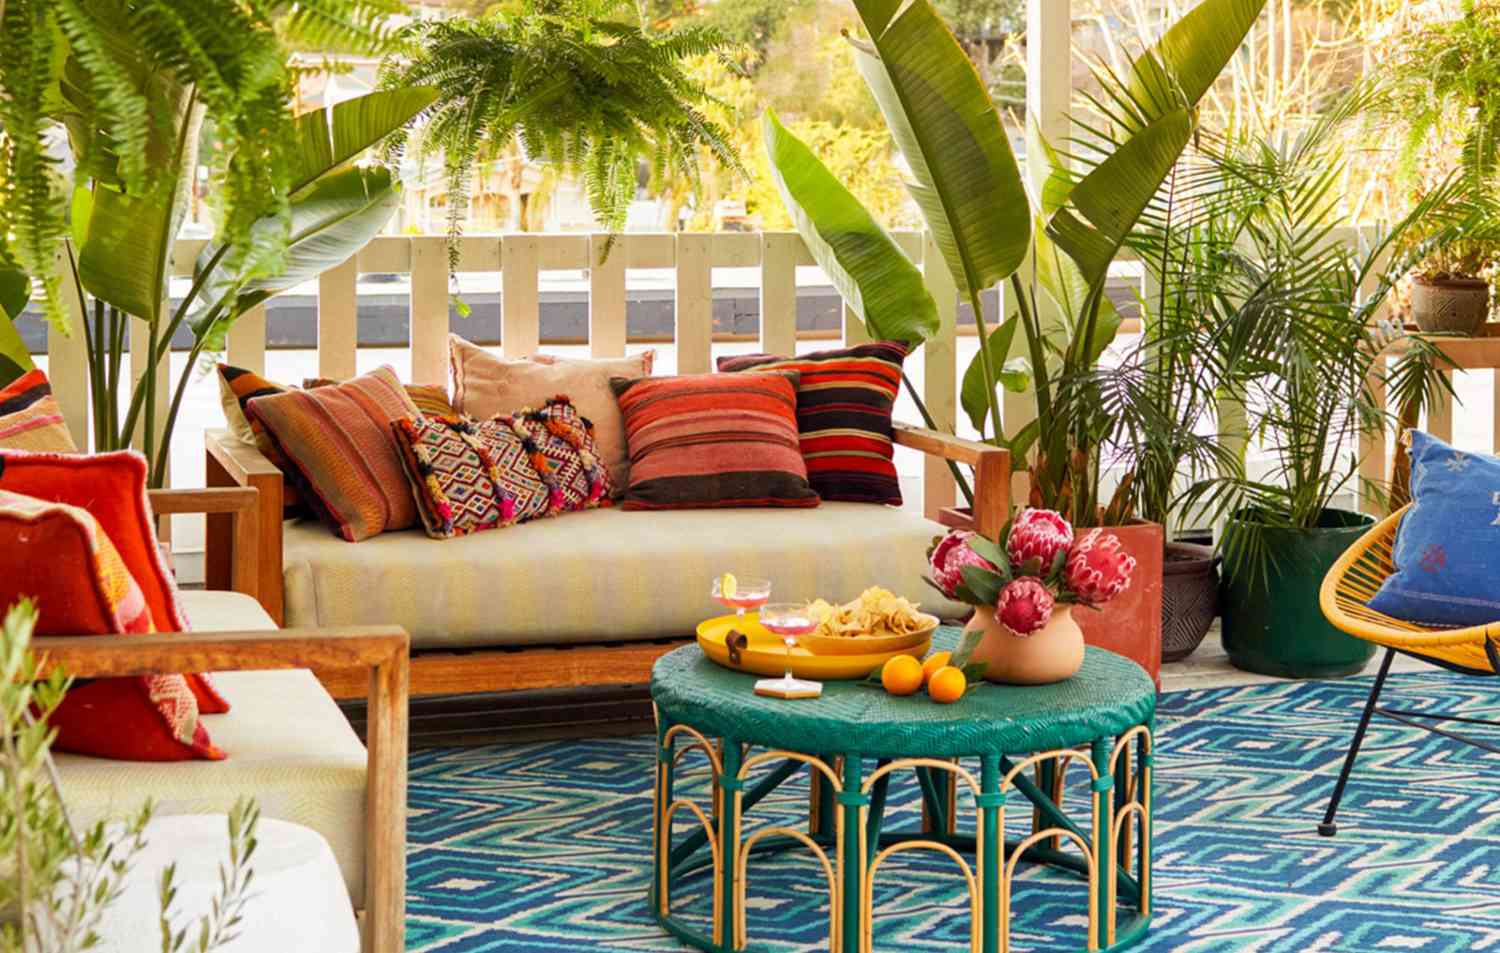 colorful outdoor lounge area with tropical plants and boho decor